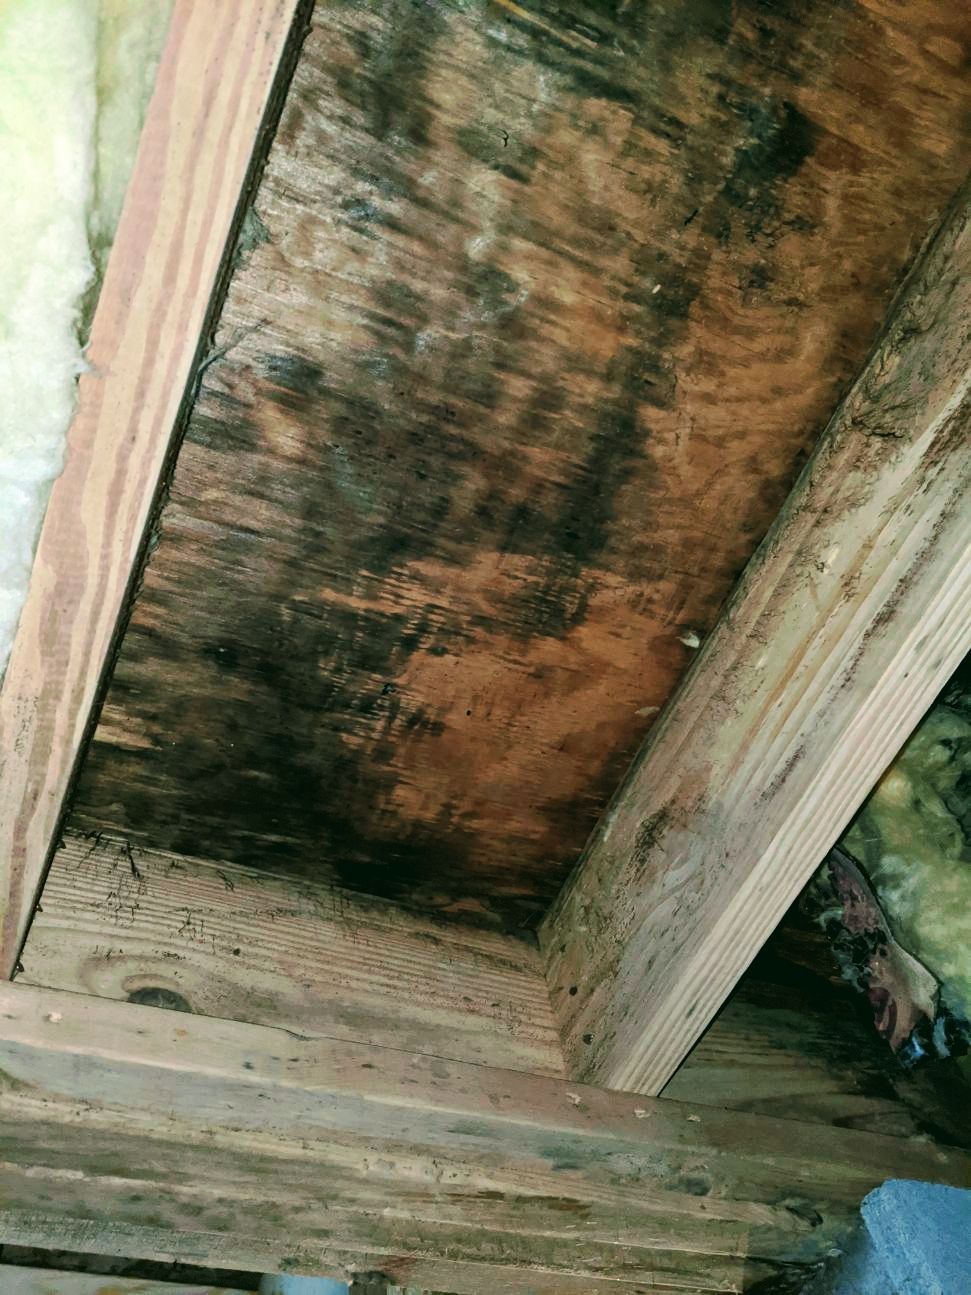 a close up of a wooden ceiling with black mold growing on it